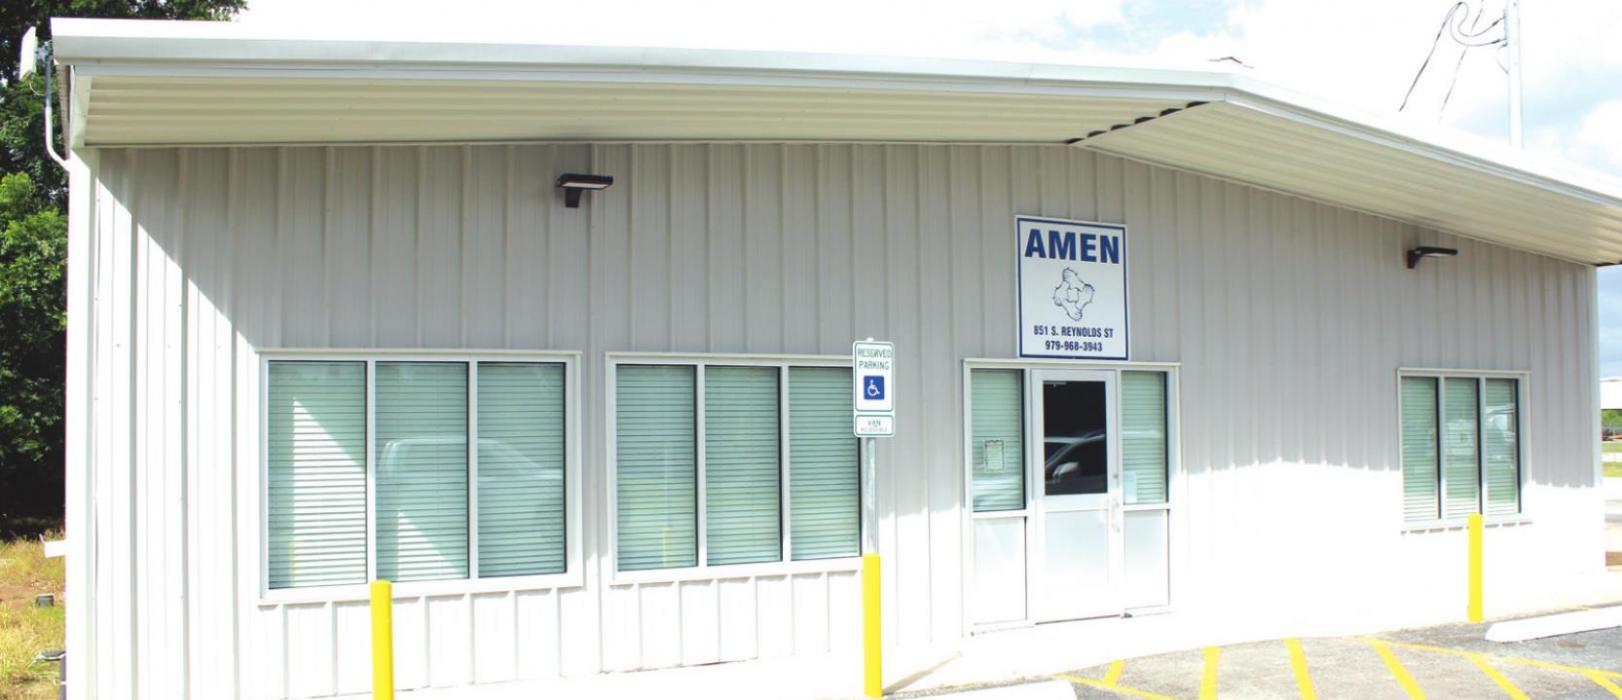 New AMEN Opens This Week